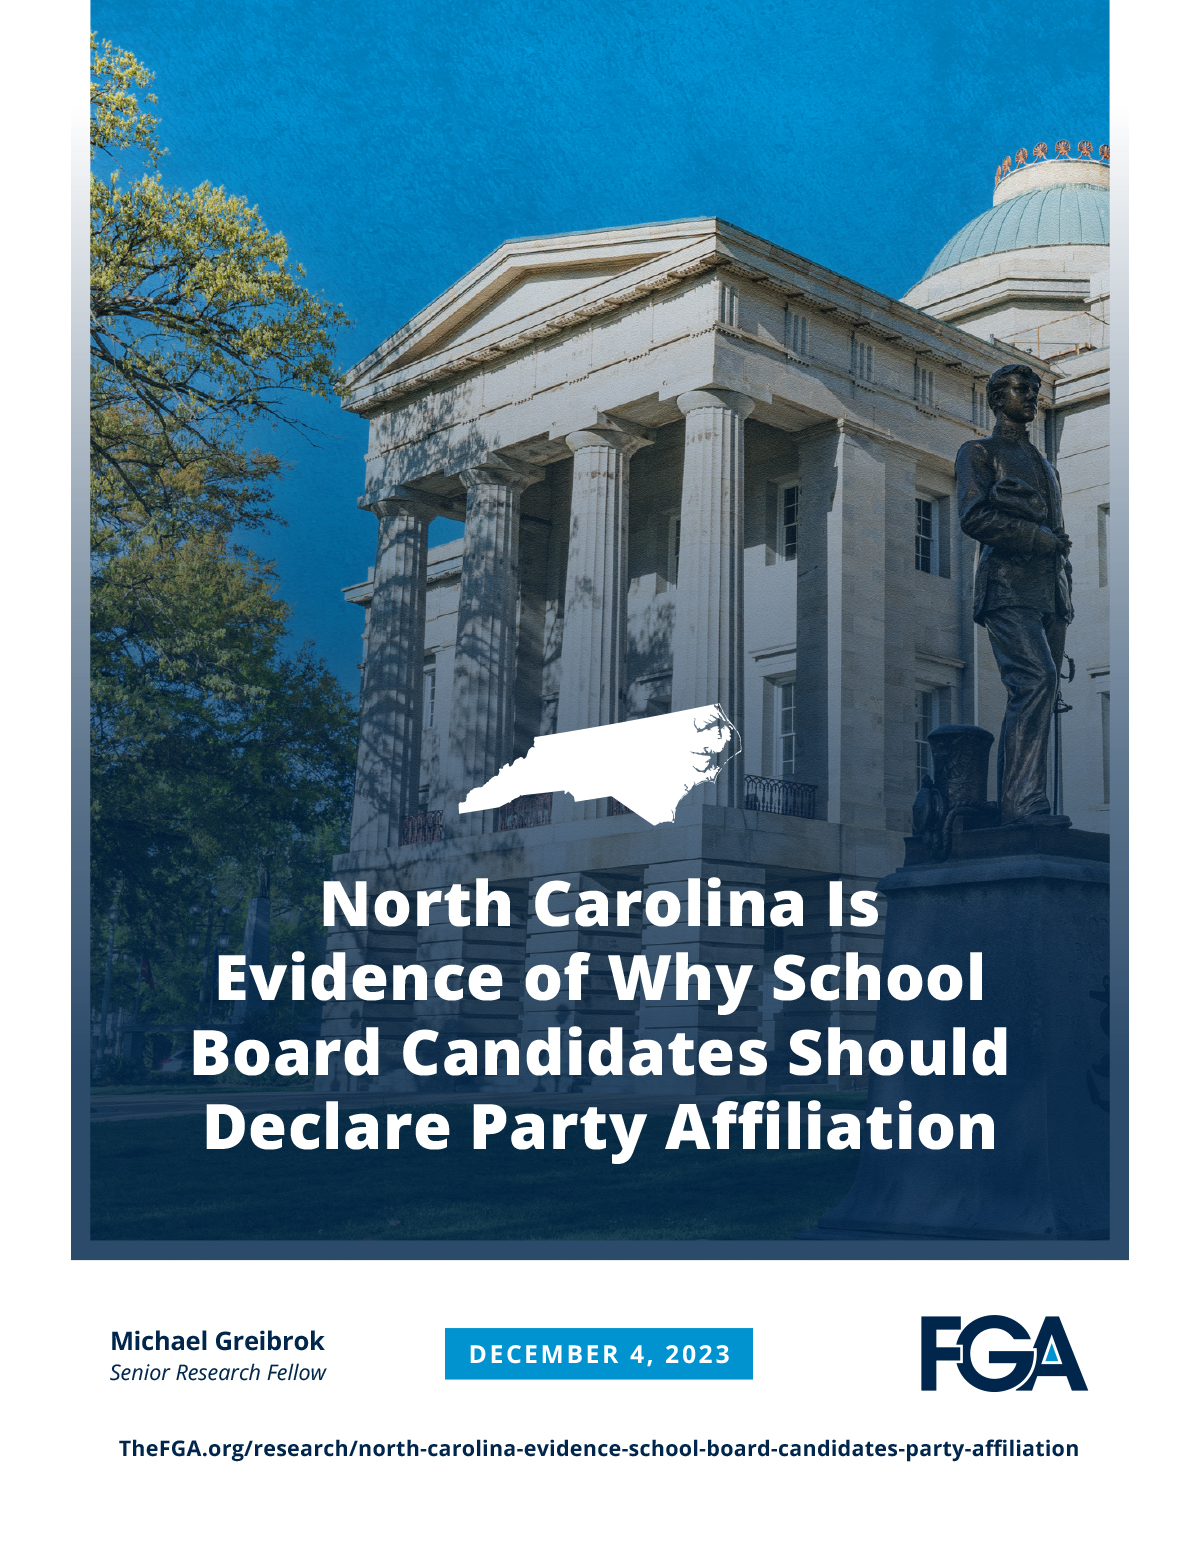 North Carolina Is Evidence of Why School Board Candidates Should Declare Party Affiliation